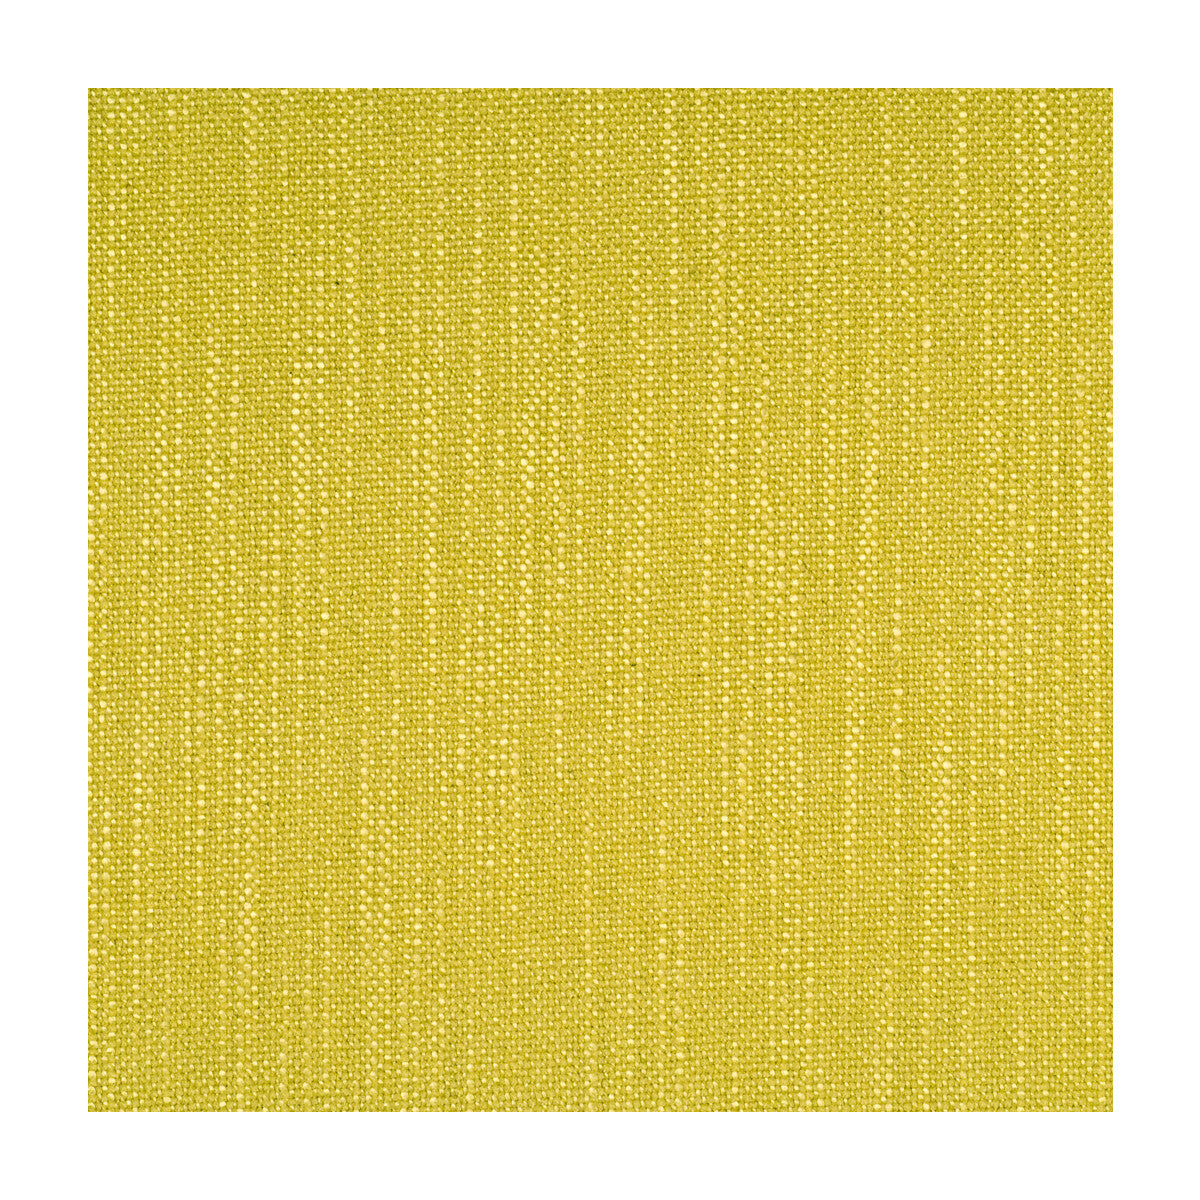 Isis fabric in daffodil color - pattern ED85001.815.0 - by Threads in the Zanzibar collection